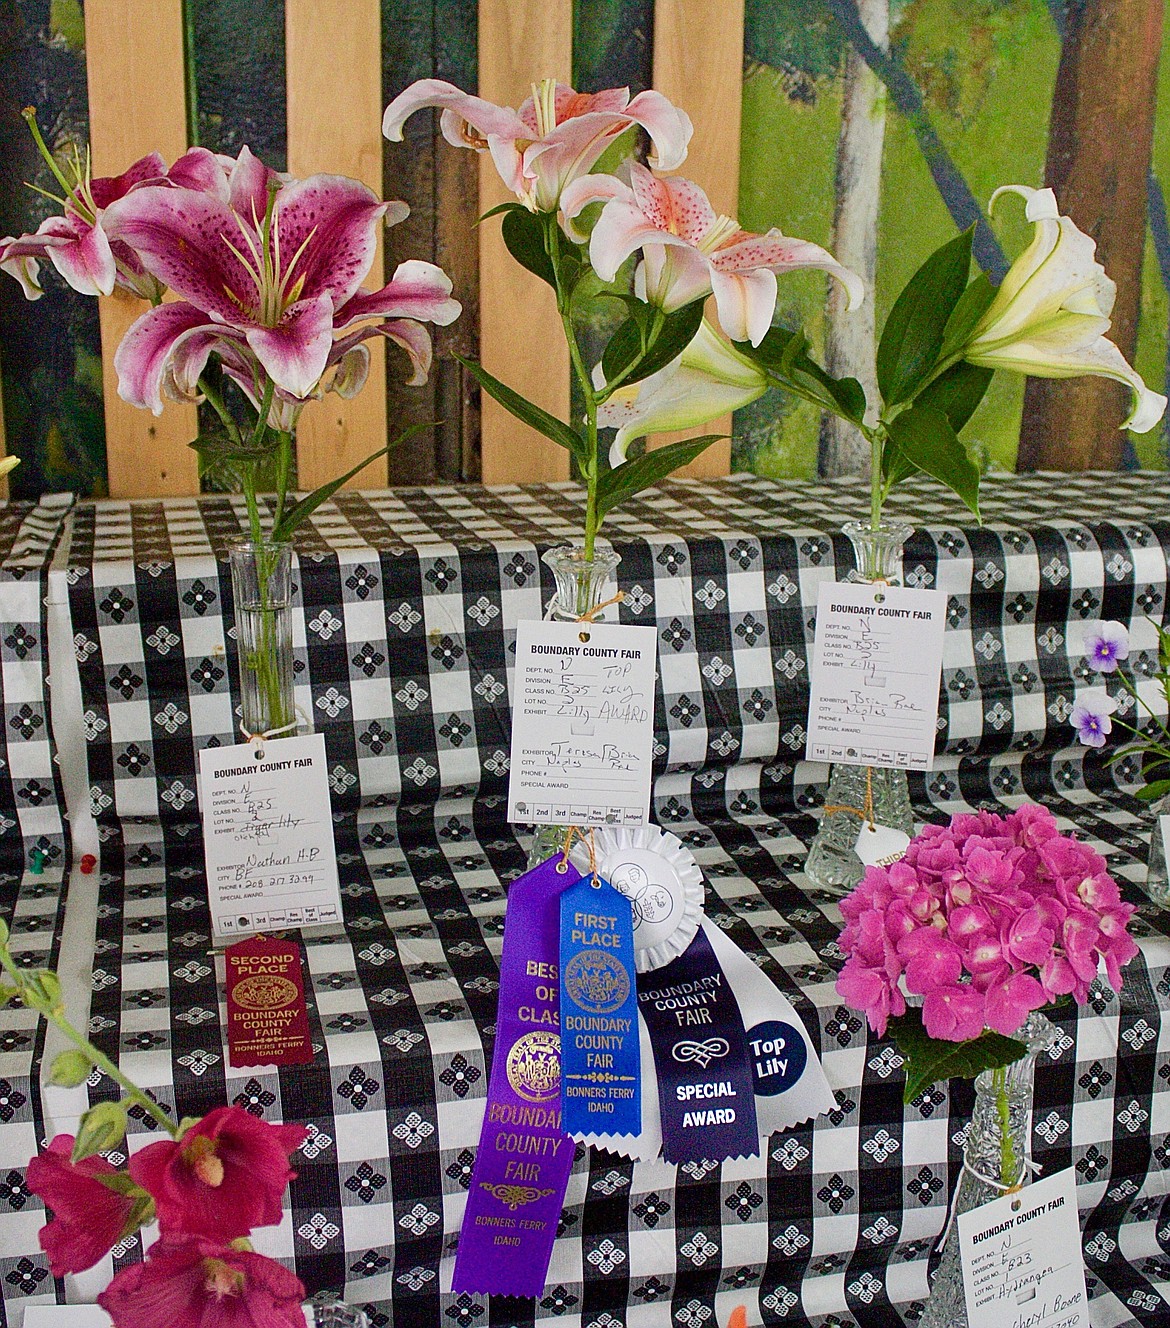 The Lily Award, Special Award, a blue ribbon and Best of Class was awarded to Teresa and Brian Rae of Naples.